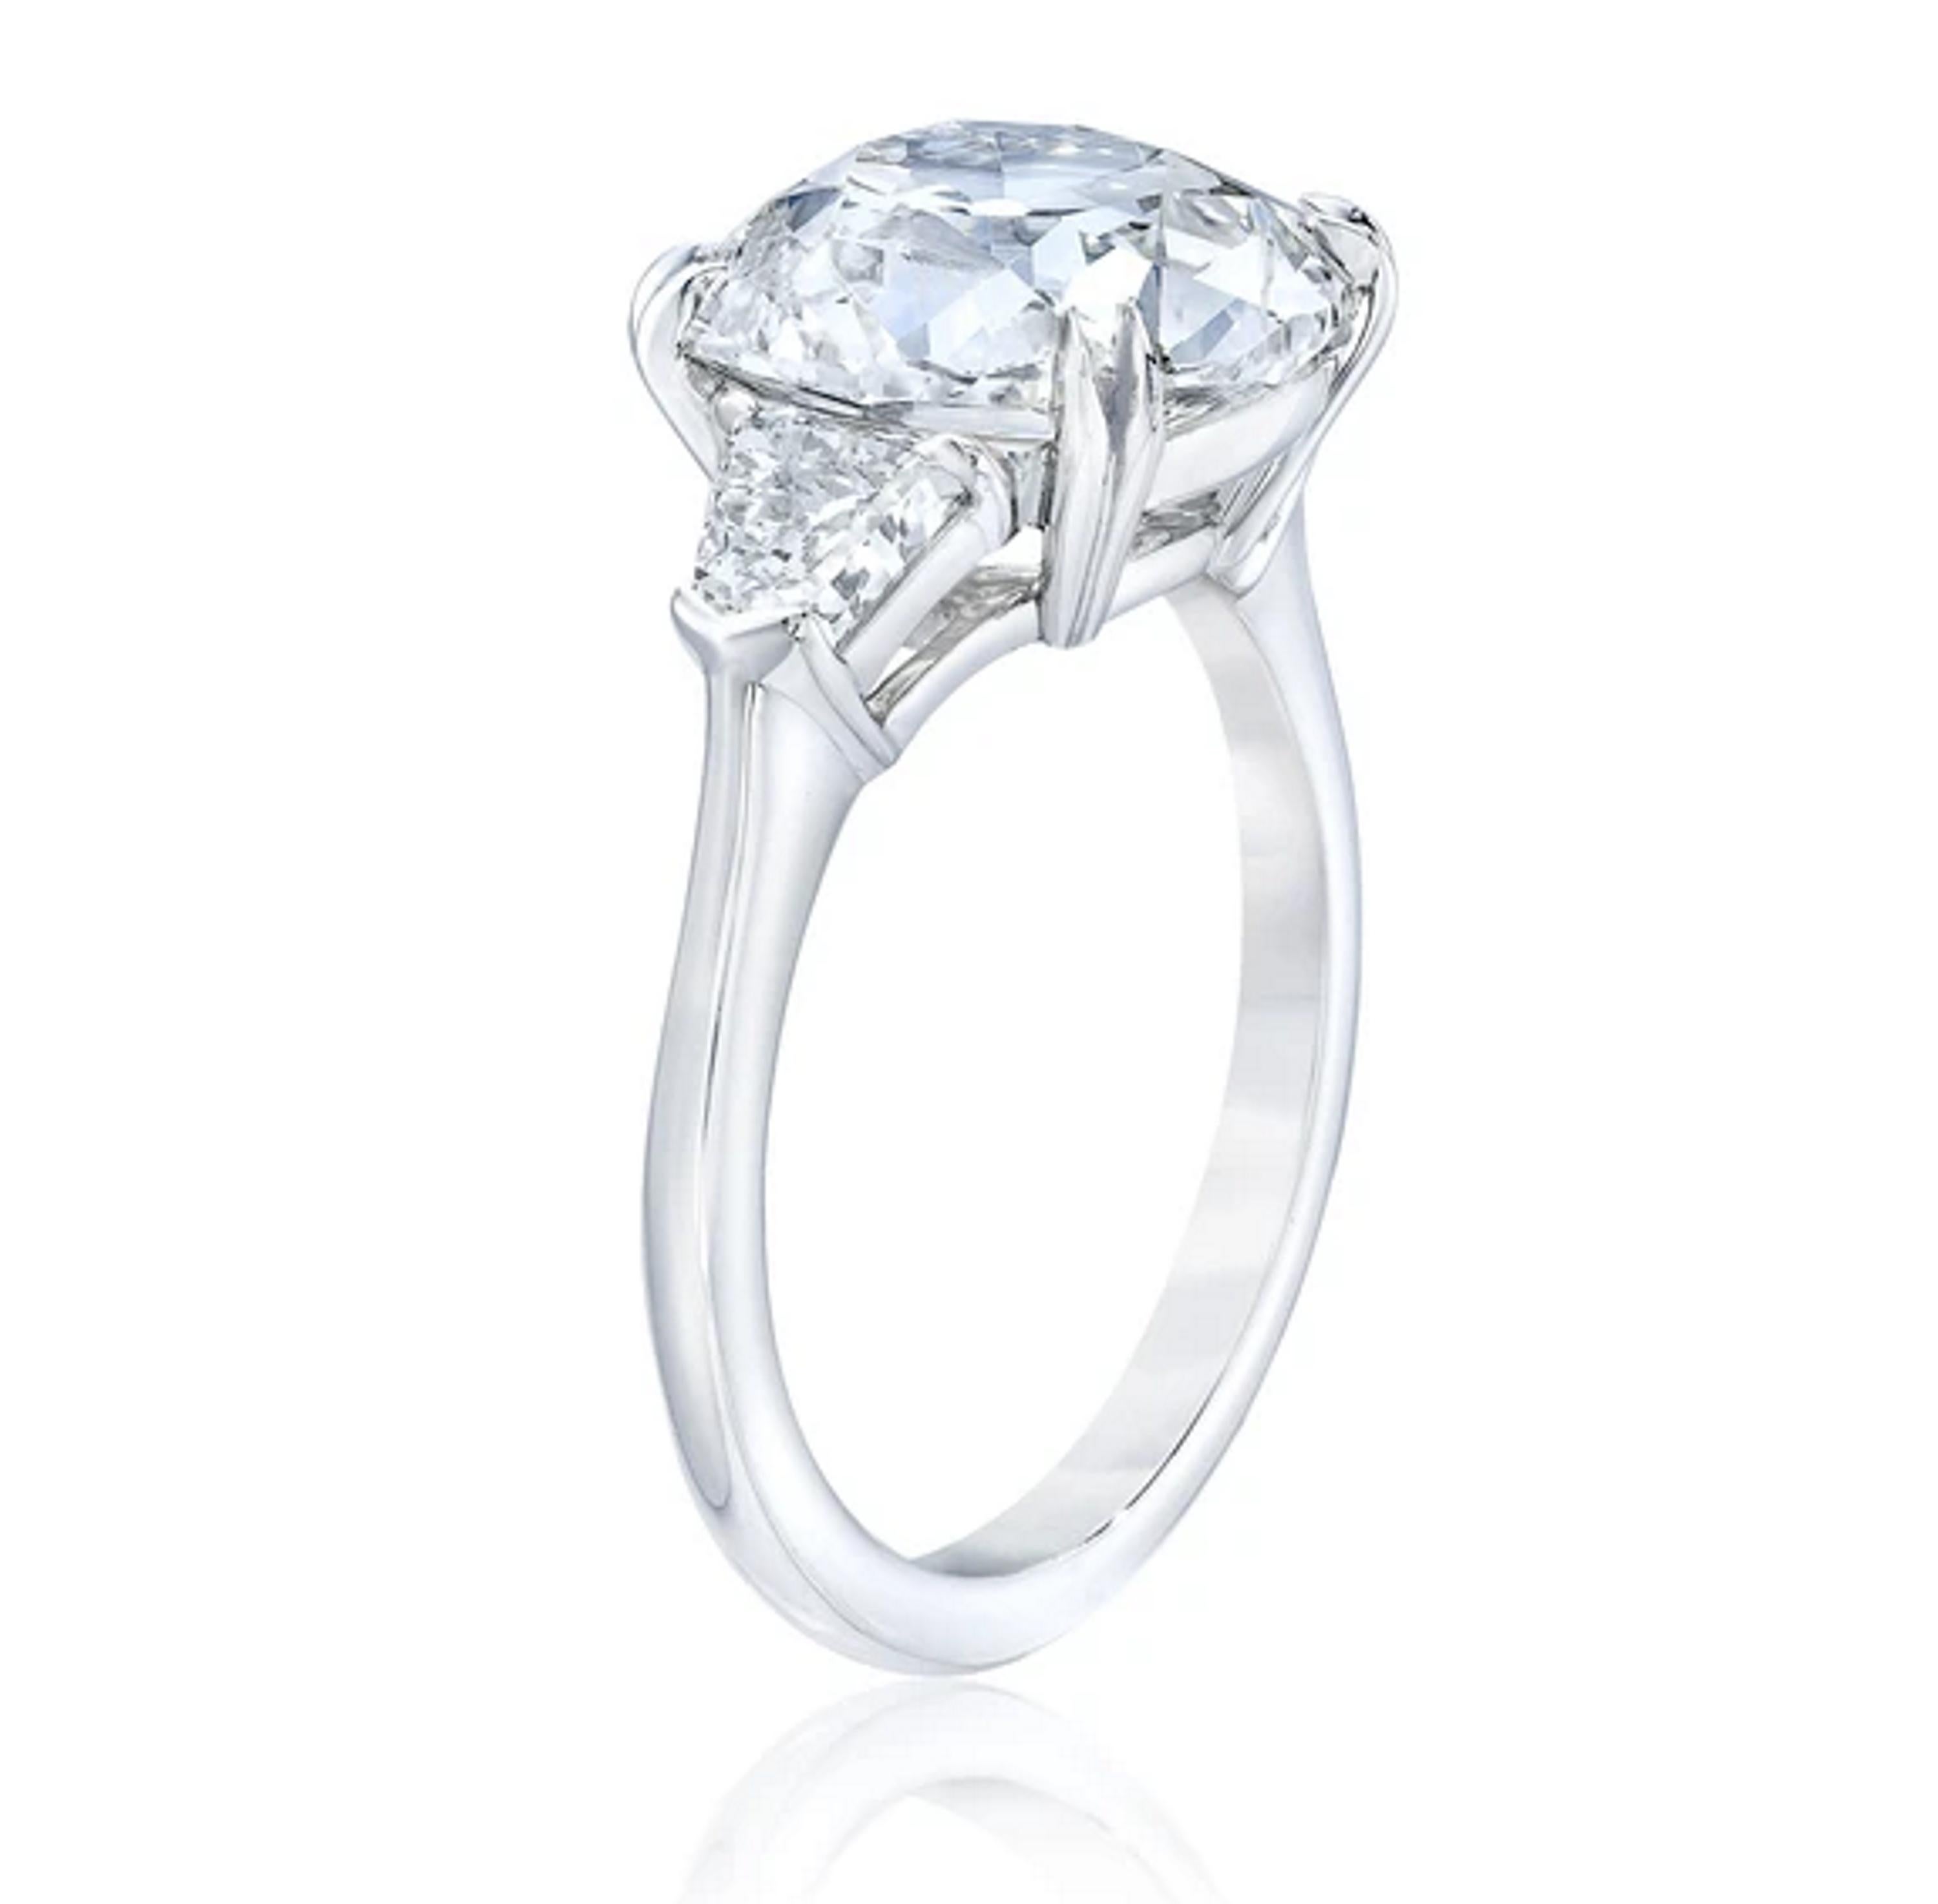 This three stone diamond ring features an 1.35 Old Mine Cut center 
GIA Certificate Included
Gemstone:  Diamond
Diamond Weight: 1.35 Carats - Old Mine Brilliant Cut - 
Center Diamond Color: I
Diamond Clarity: SI 2

